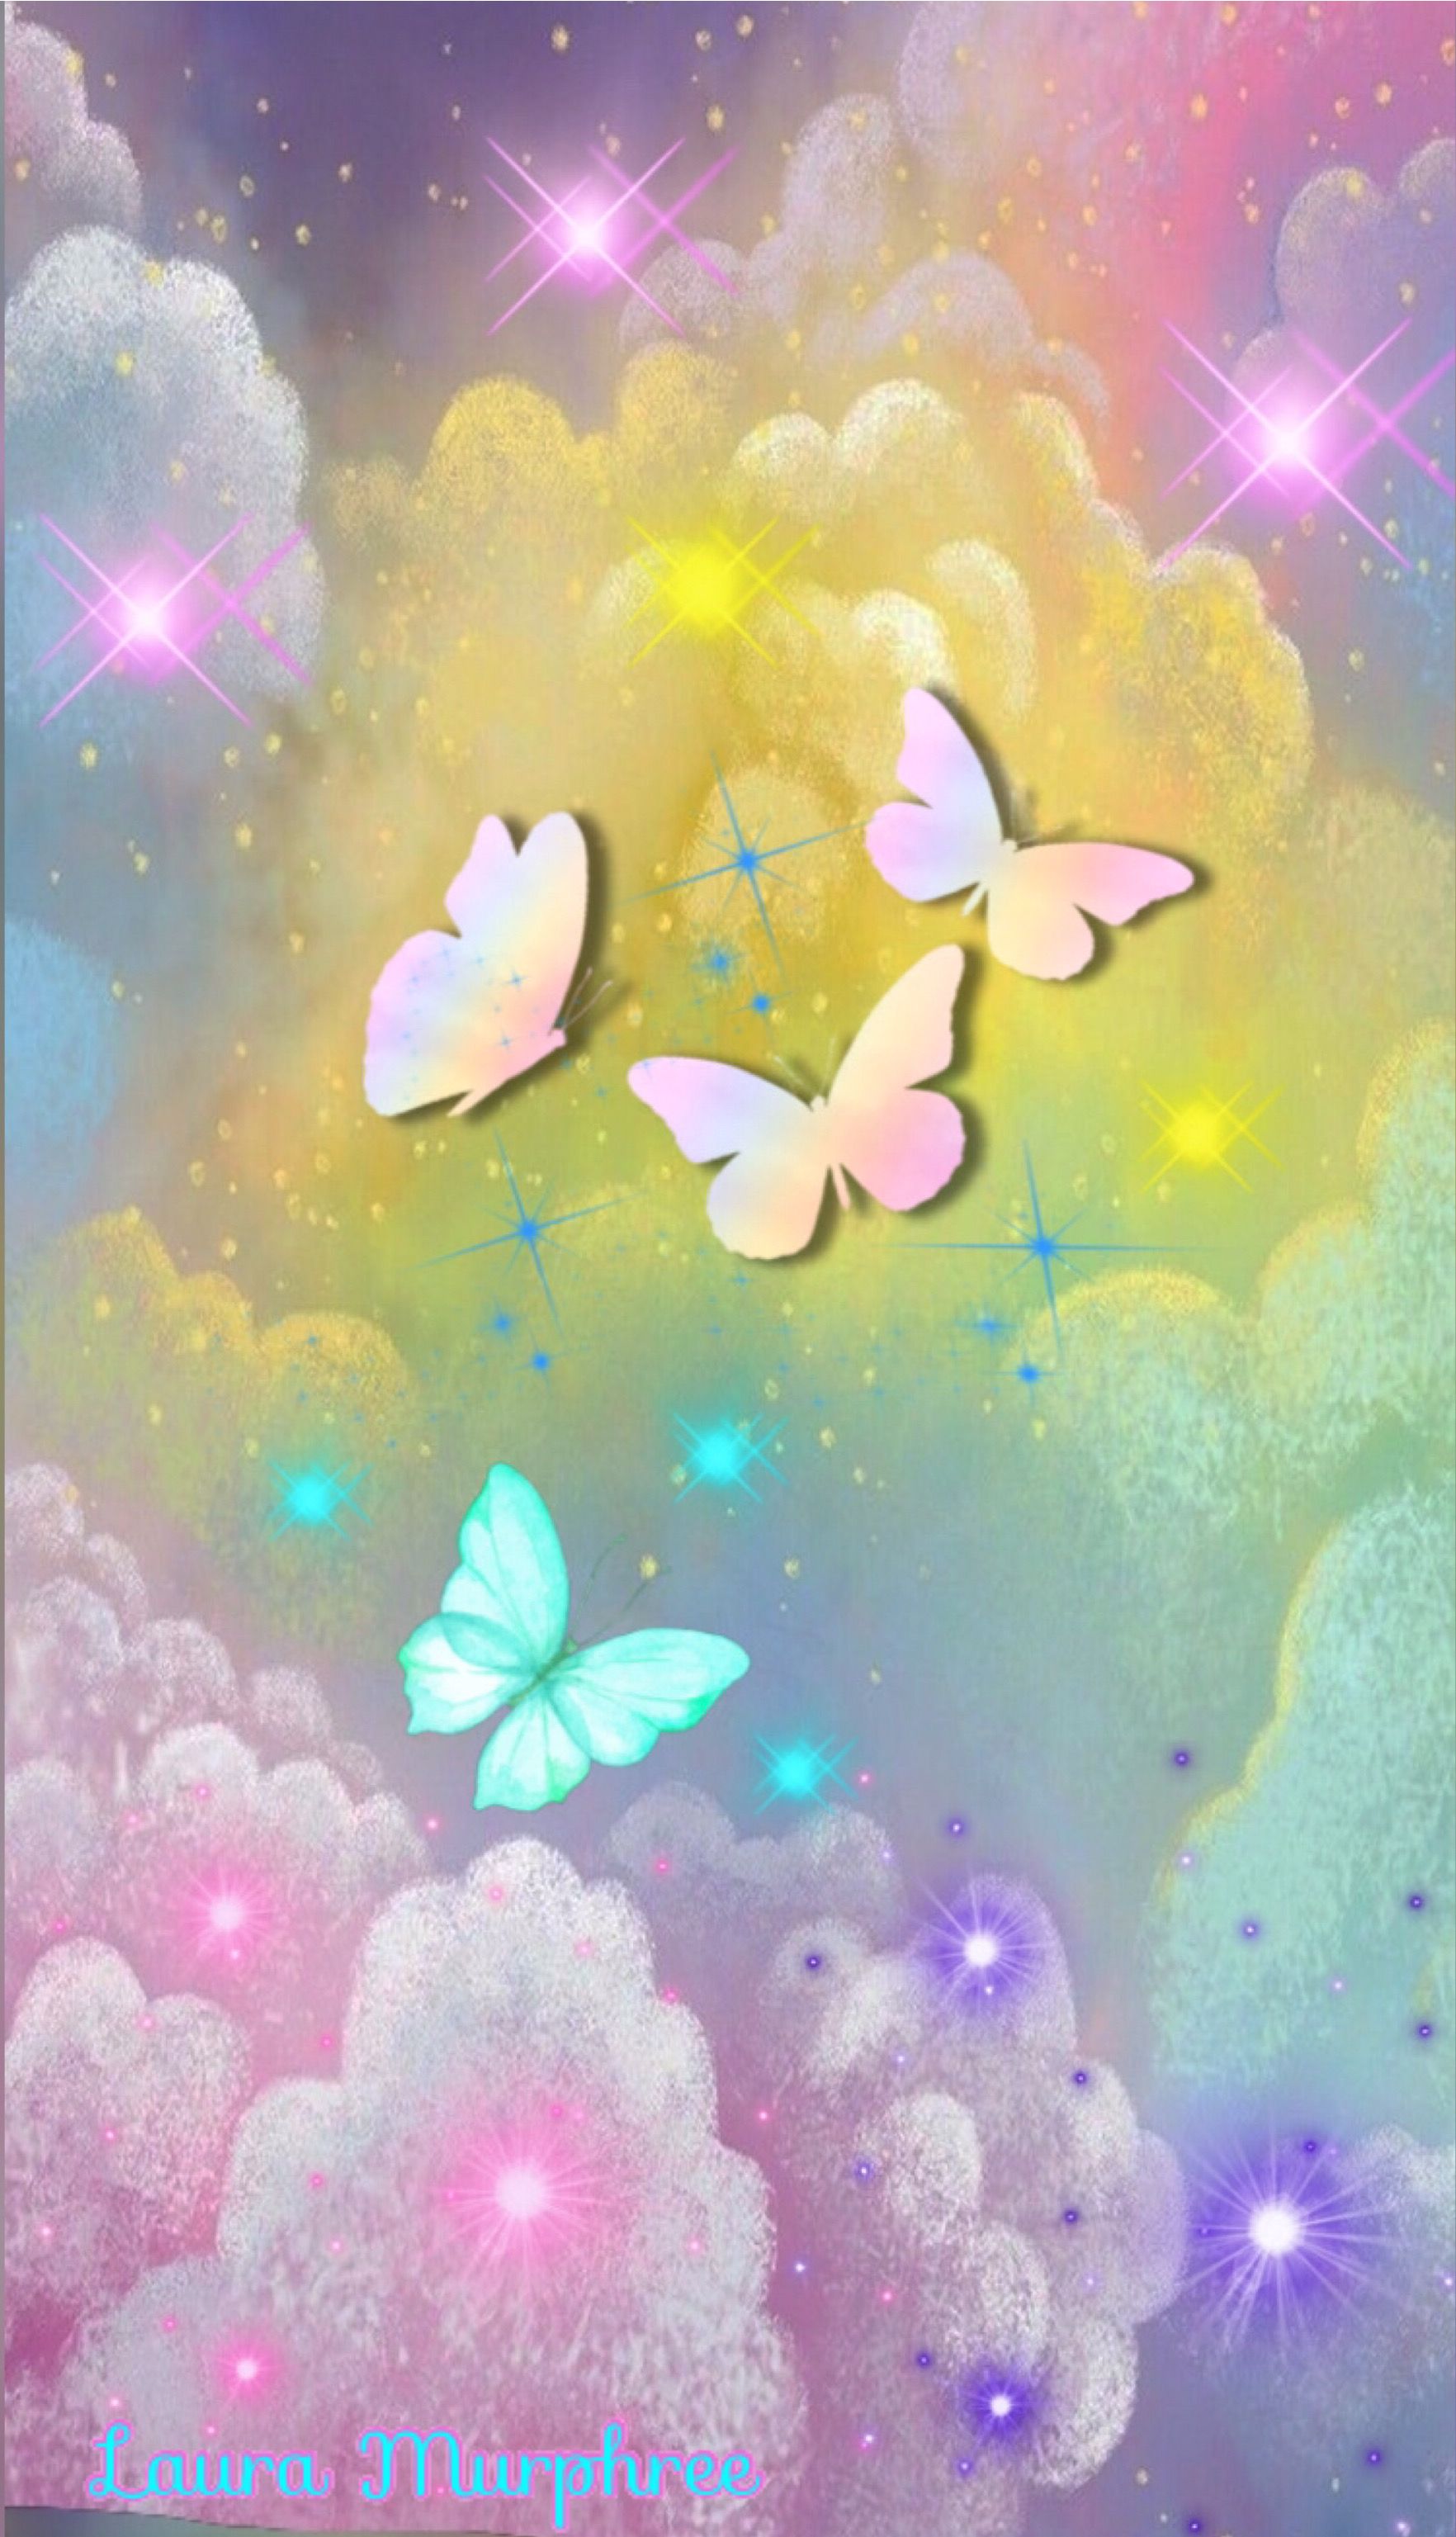 Glitter butterfly wallpaper. Butterfly wallpaper, Sparkle wallpaper, iPhone wallpaper girly